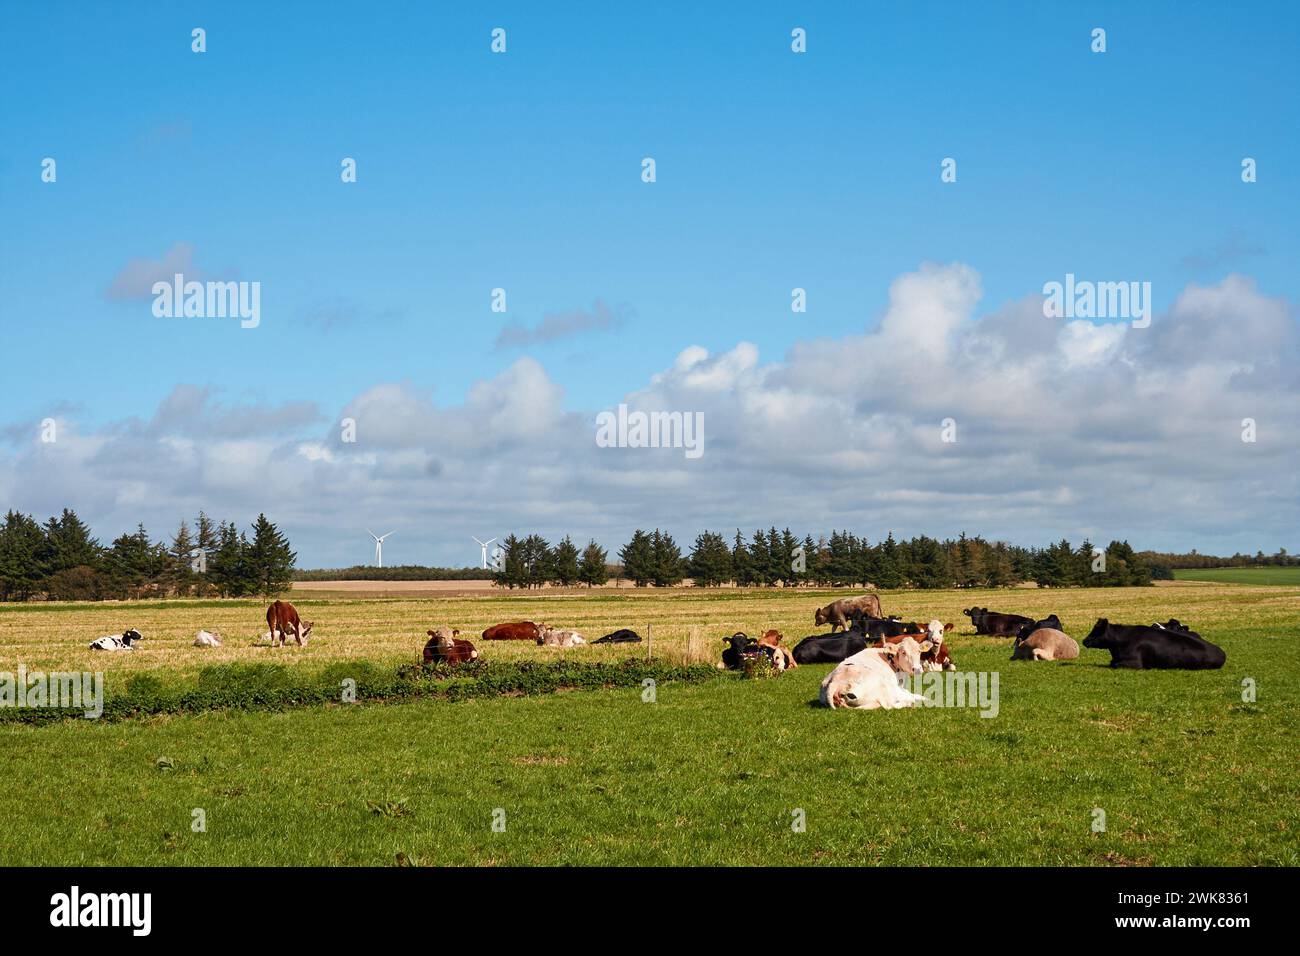 Typical Danish country side, landscape with cows in a grass field, windmills in the background; Denmark Stock Photo